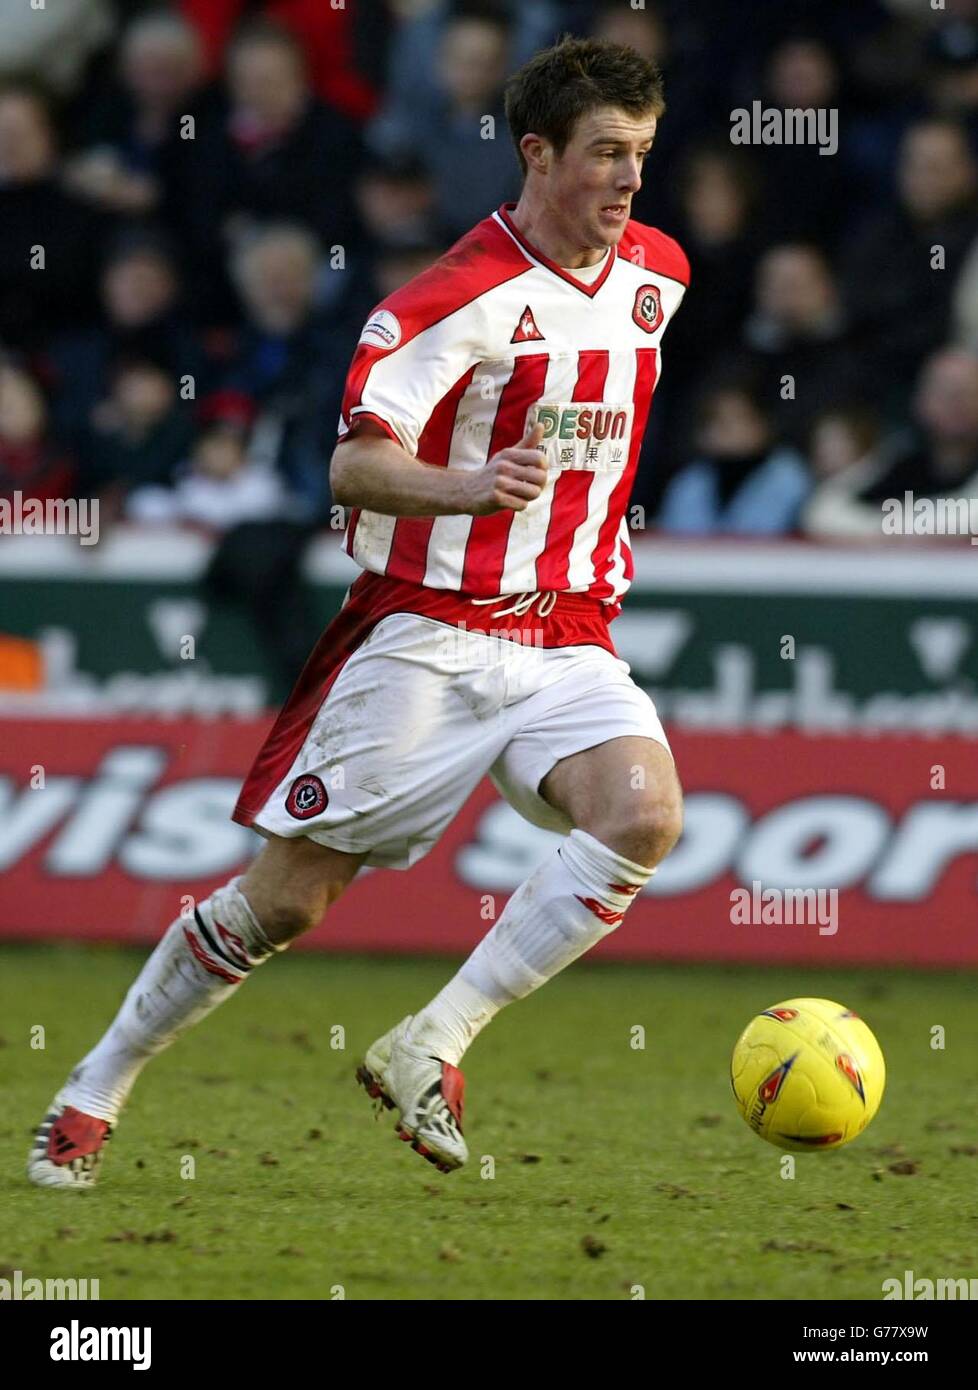 Sheffield United's Michael Tonge, during their Nationwide Division One match against Norwich City at Bramall Lane, Sheffield. Sheffield were defeated 0-1 by Norwich City. NO UNOFFICIAL CLUB WEBSITE USE. Stock Photo